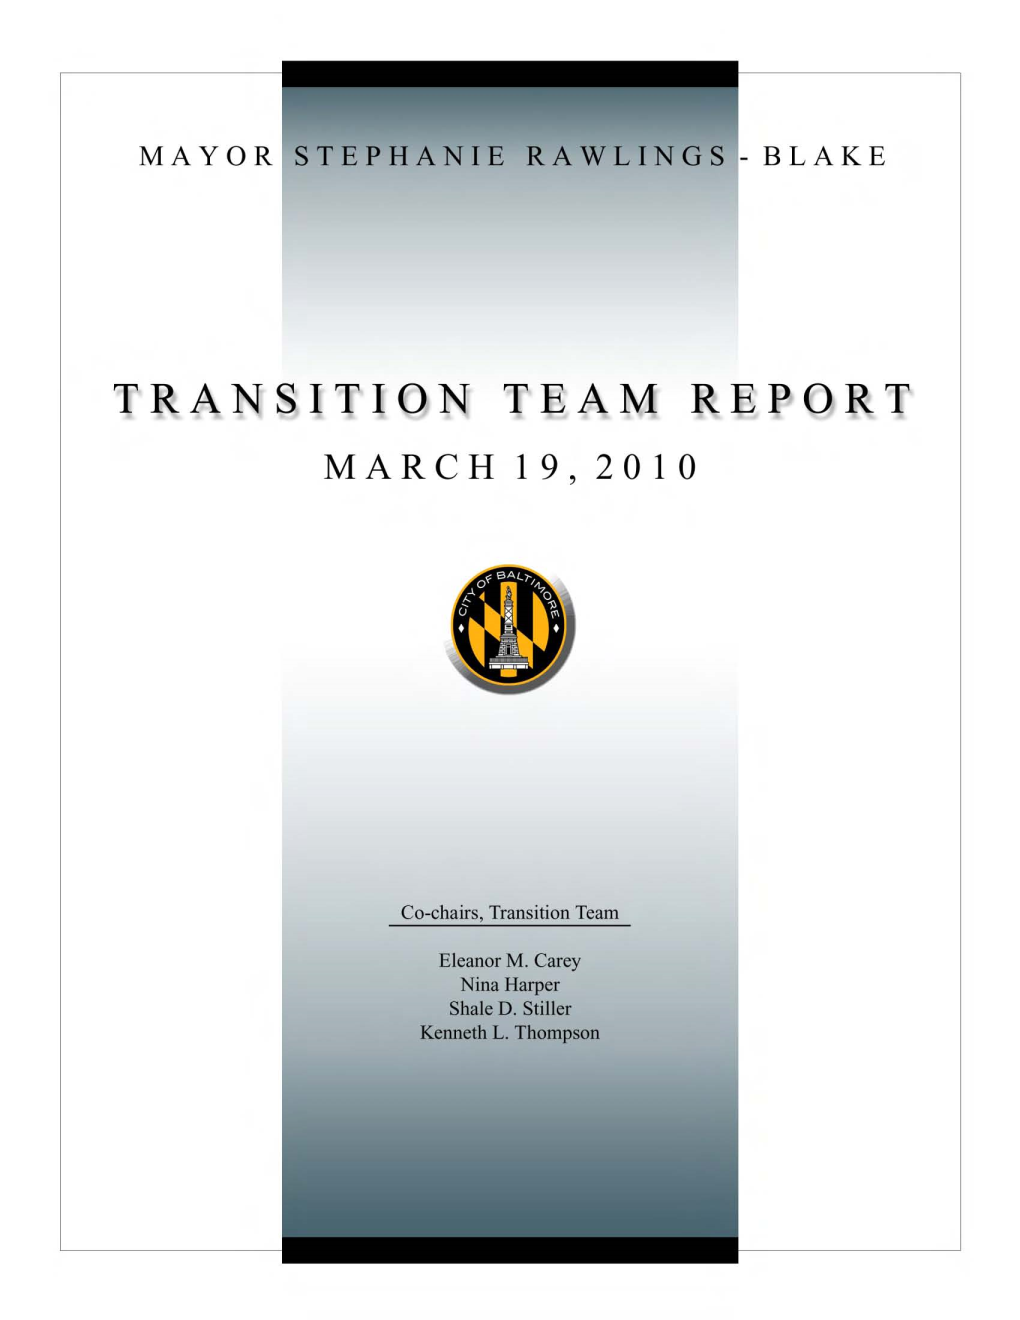 RAWLINGS-BLAKE TRANSITION TEAM REPORT Table of Contents ______